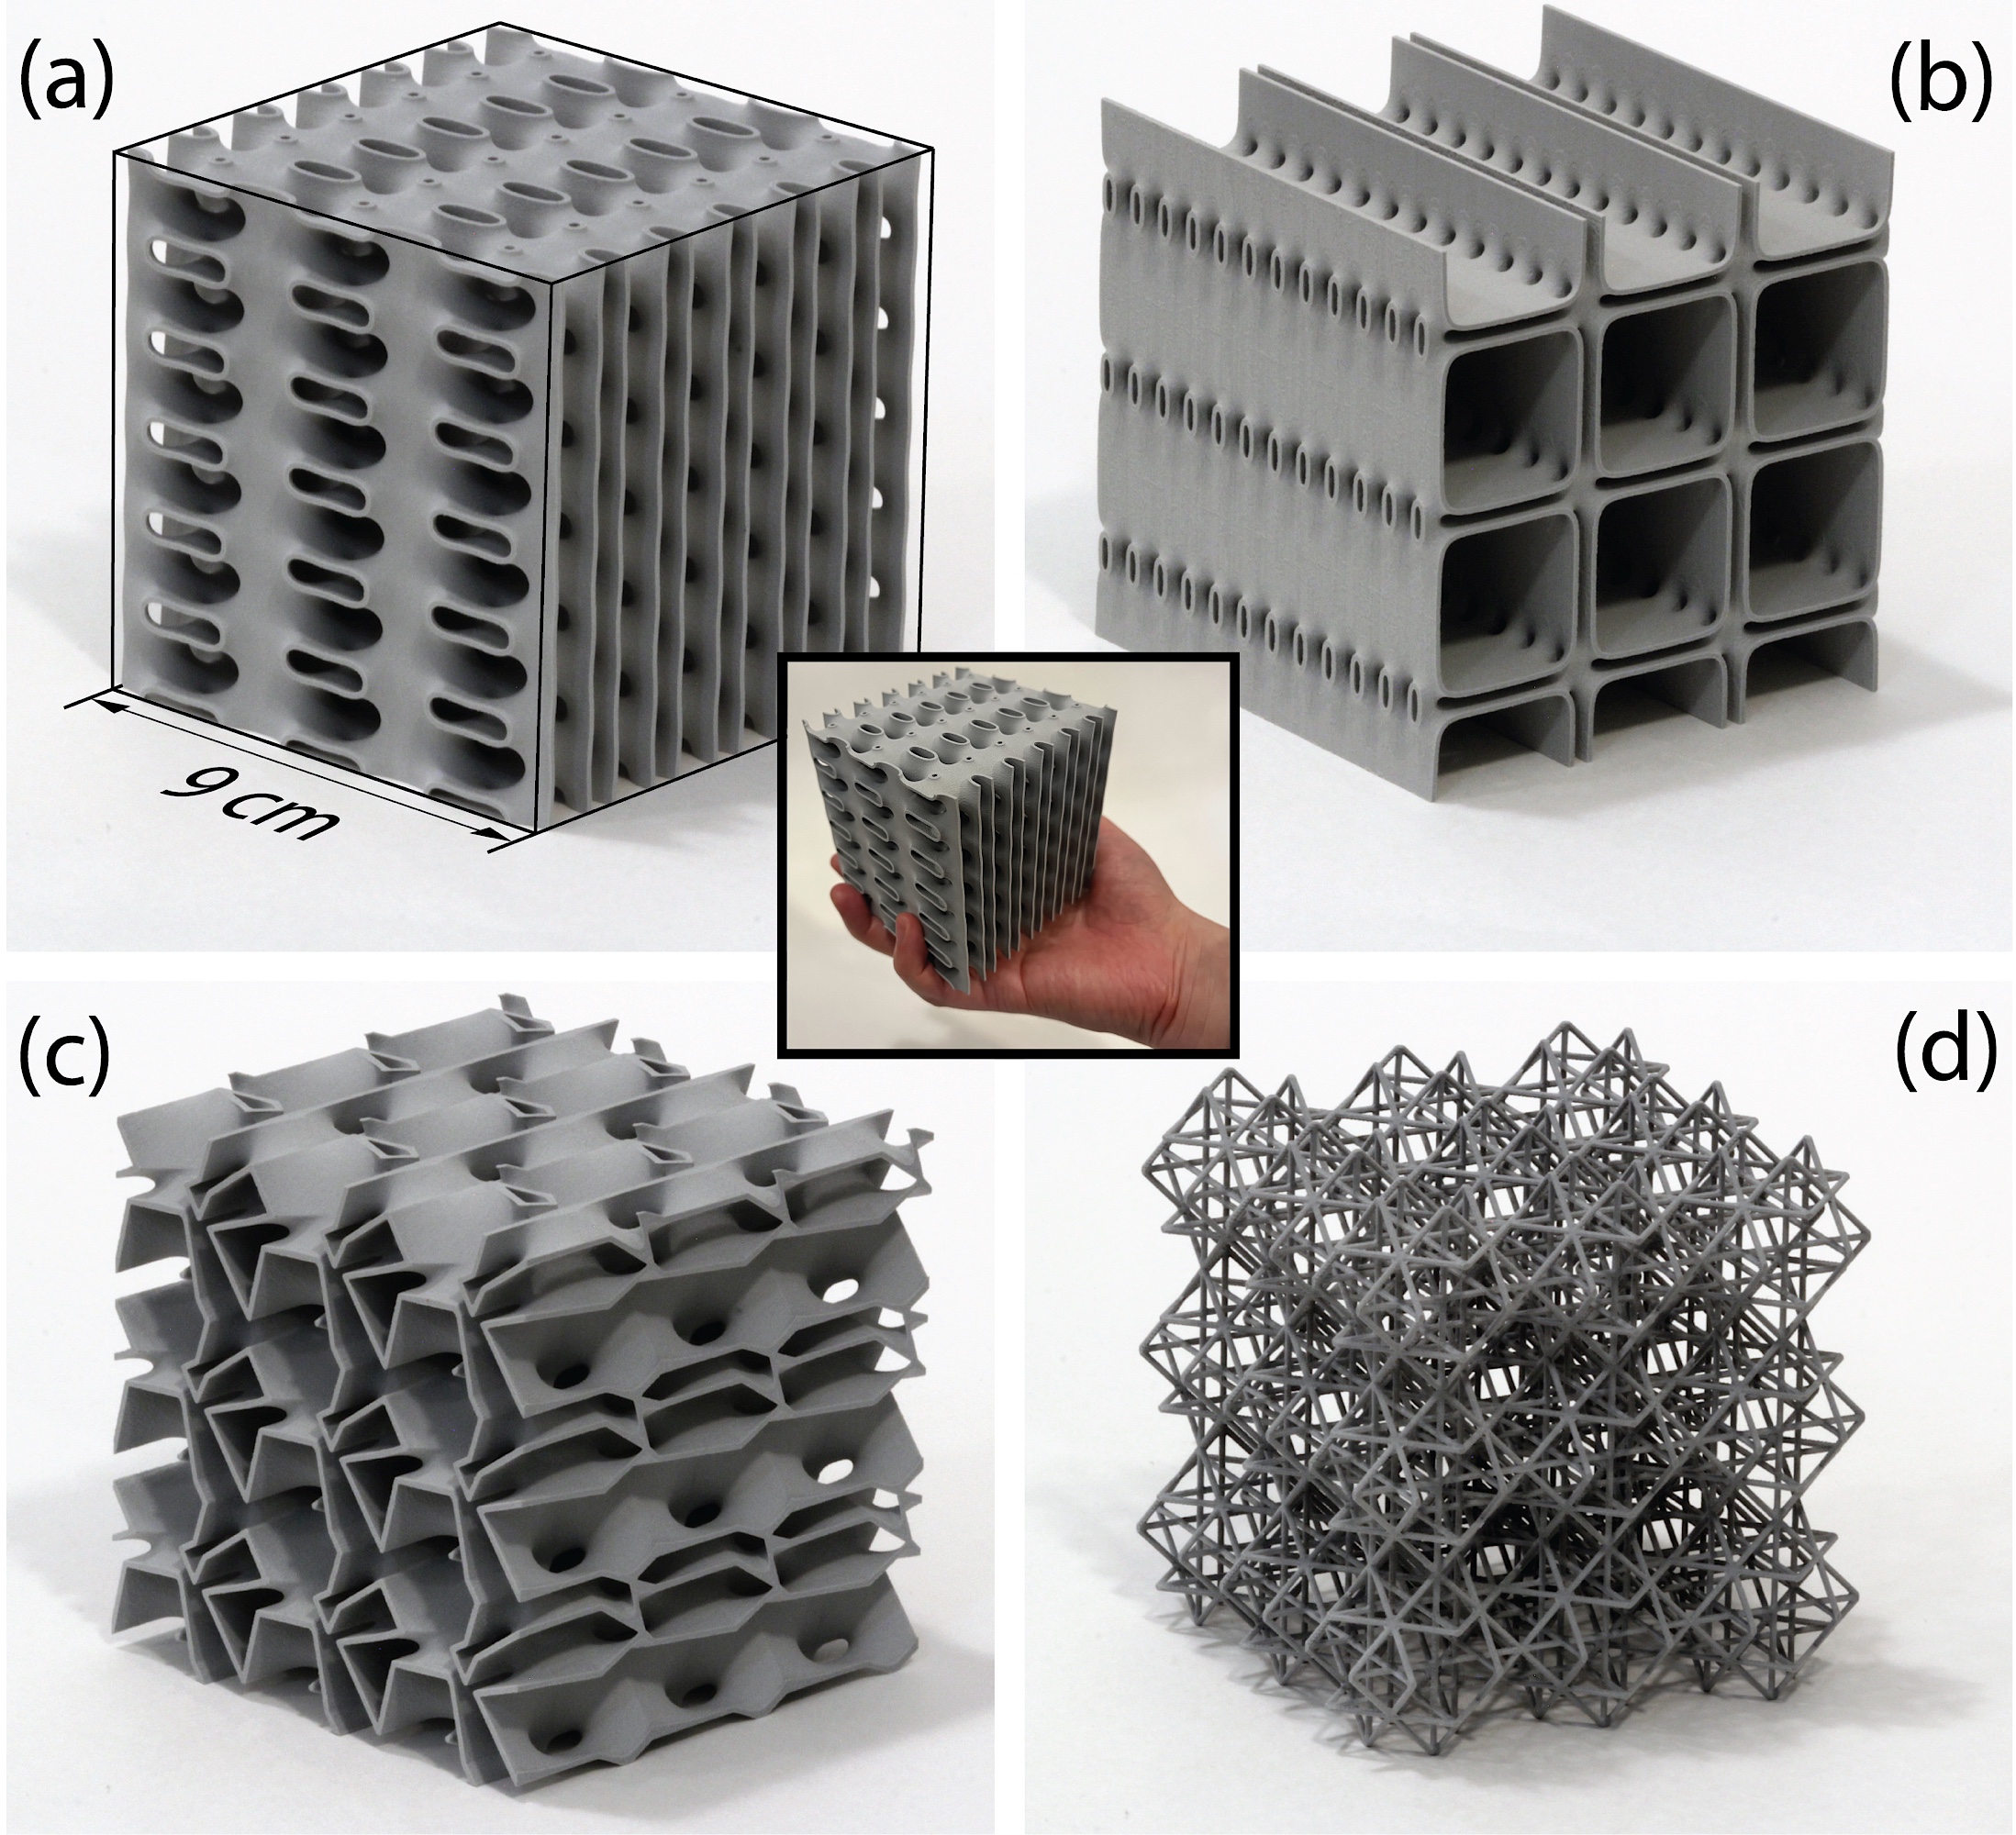 Depending on the structure, the 3D printed materials have different properties such as weight, acoustics or thermal conductivity.